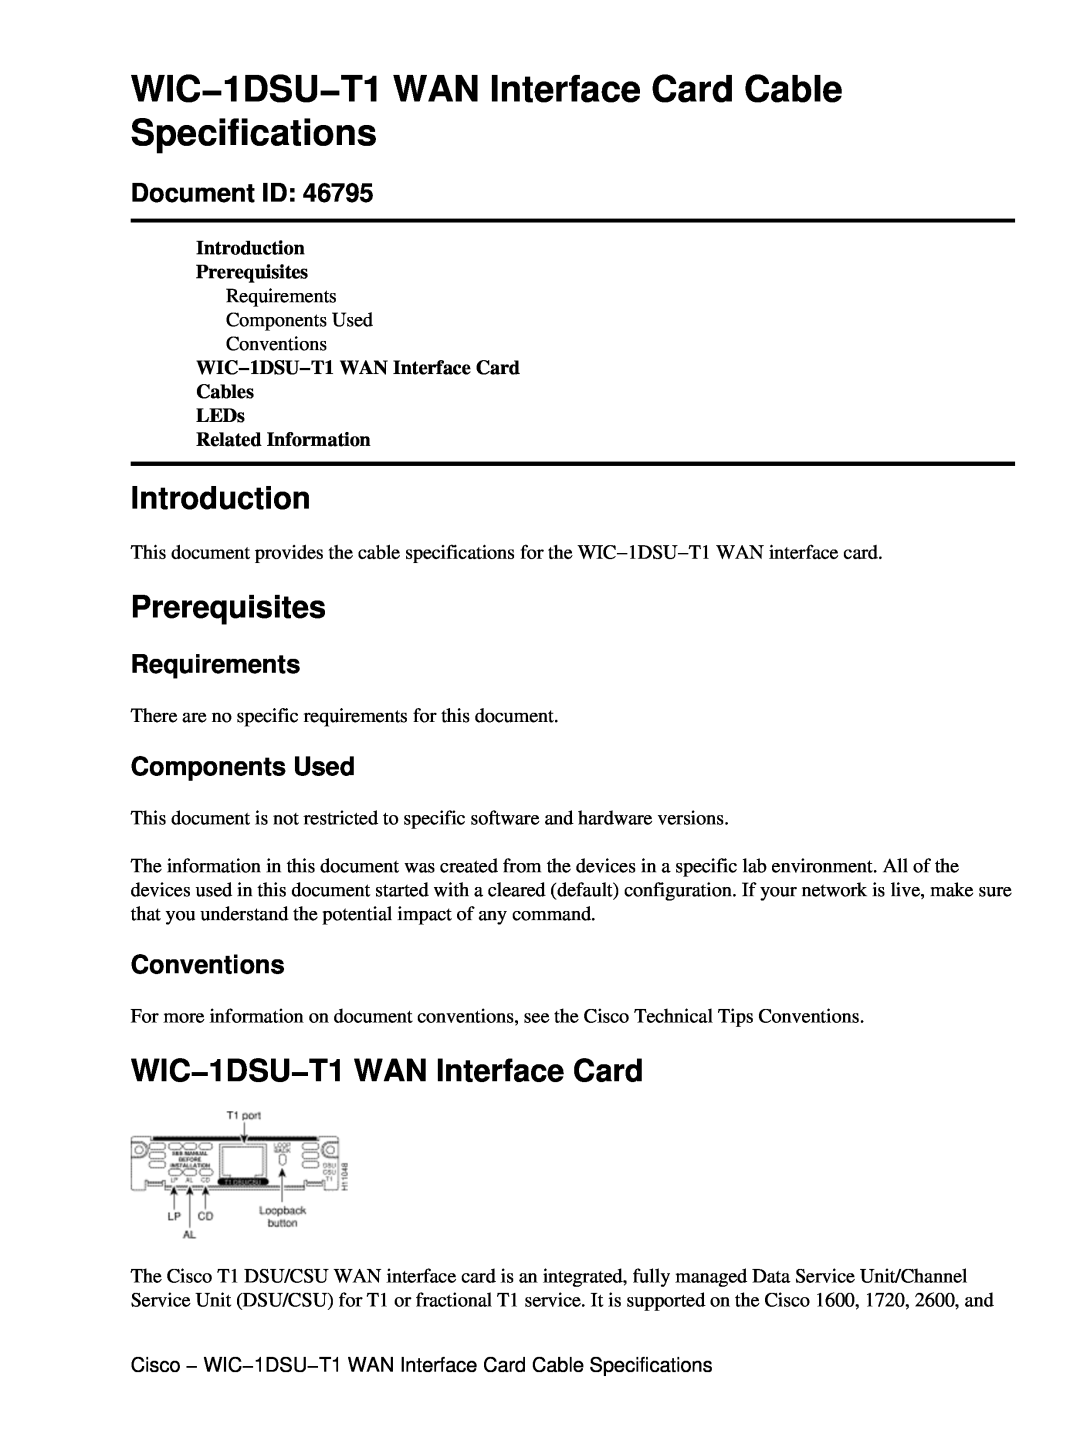 Cisco Systems WIC-1DSU-T1 WIC−1DSU−T1 WAN Interface Card Cable Specifications, Introduction, Prerequisites, Document ID 